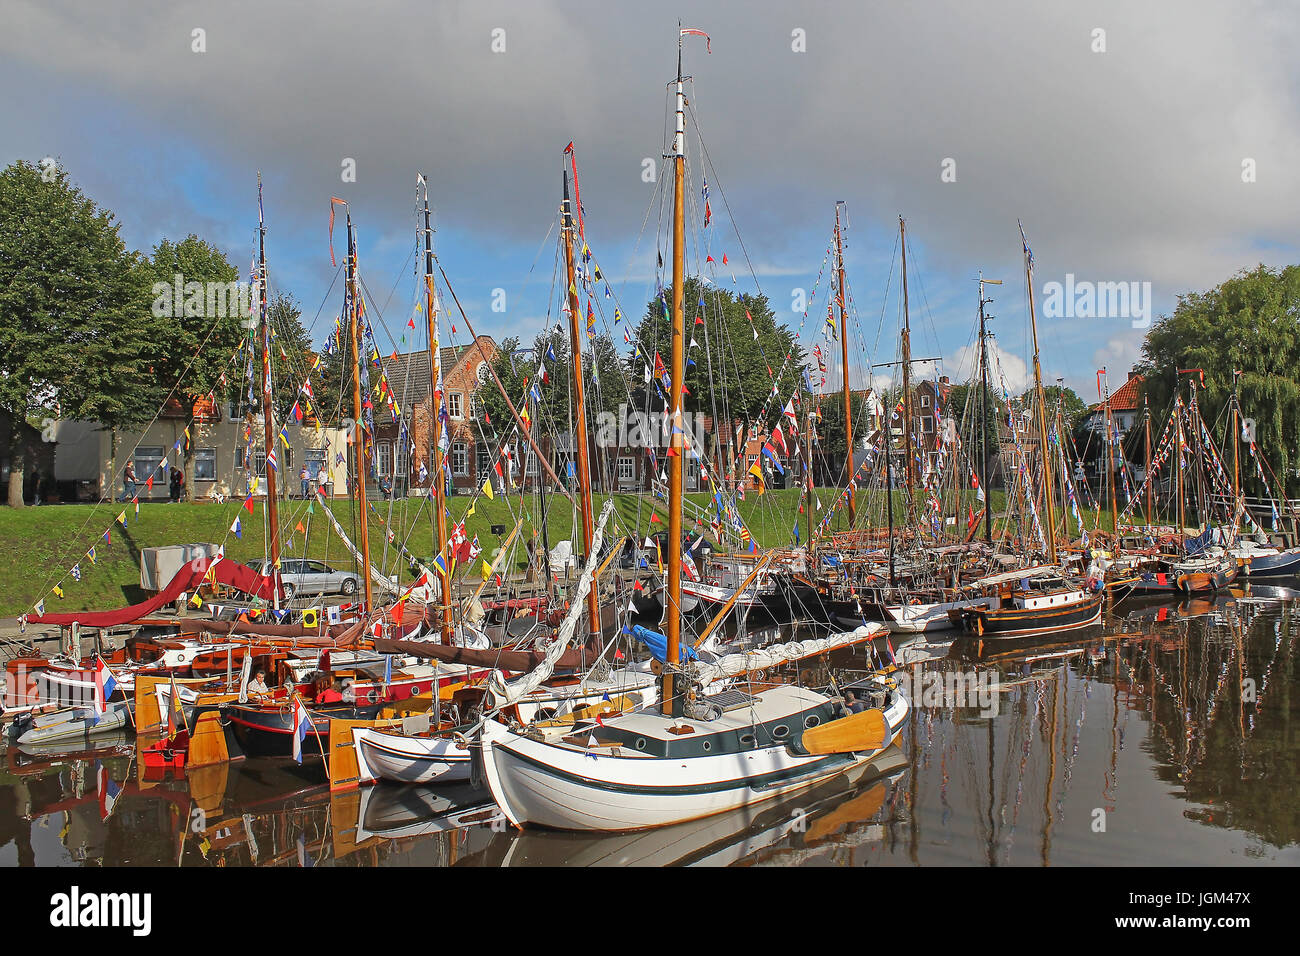 The Federal Republic of Germany, Lower Saxony, Norddeuschland, North Sea coast, East Friesland, Carolinensiel, harbour party, harbour, floodgate harbo Stock Photo